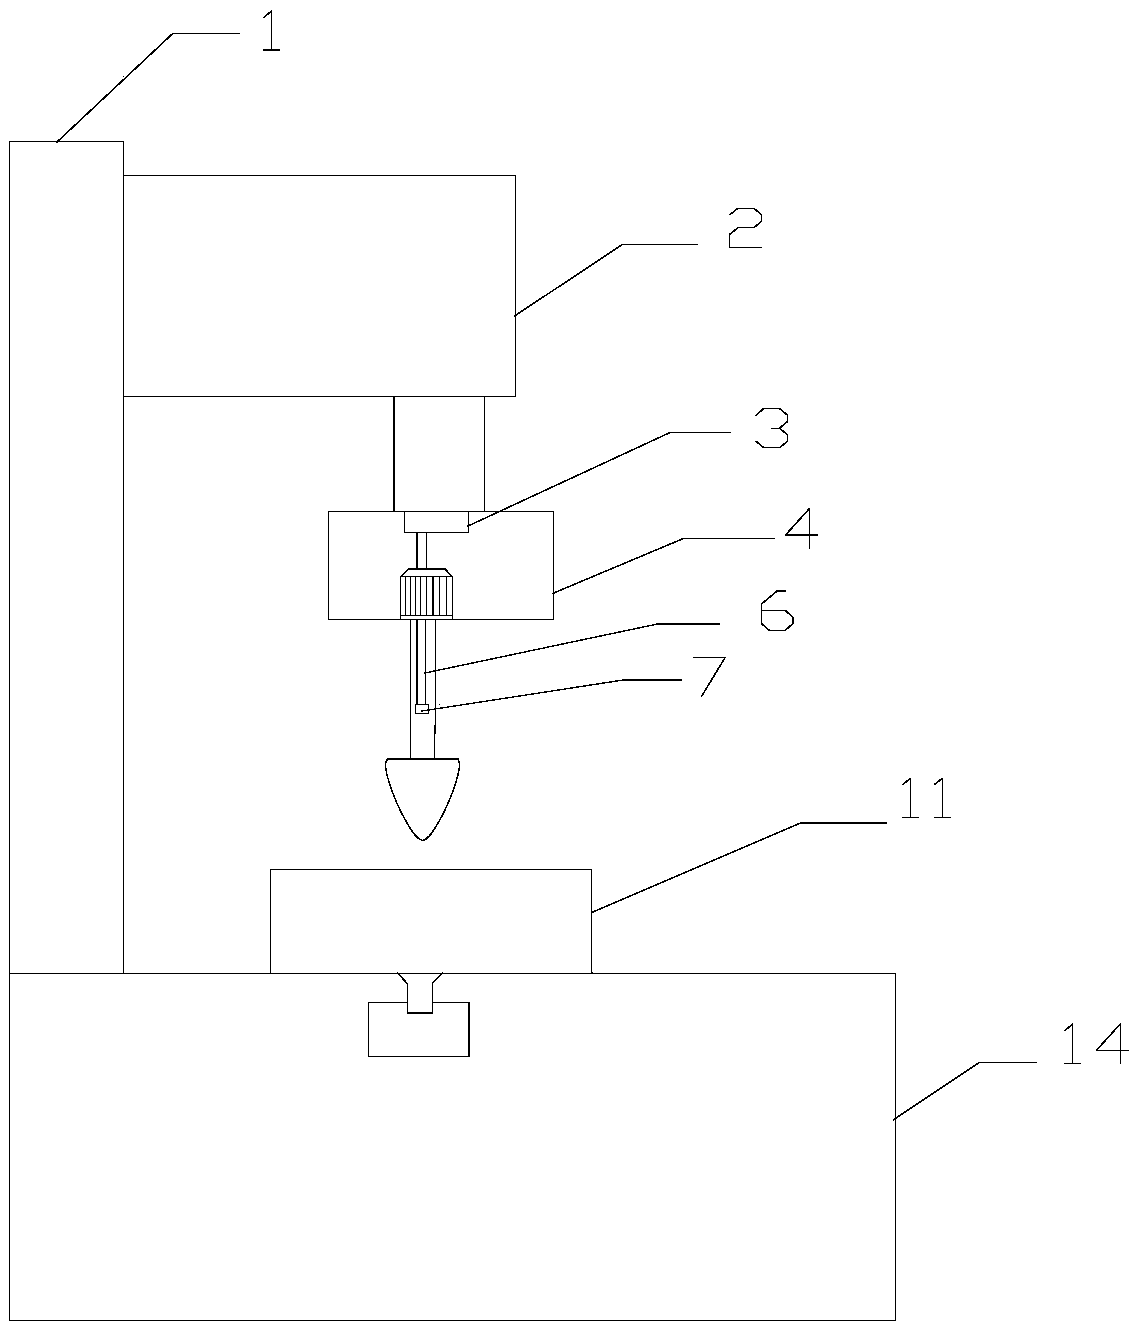 Bearing oil-coating device